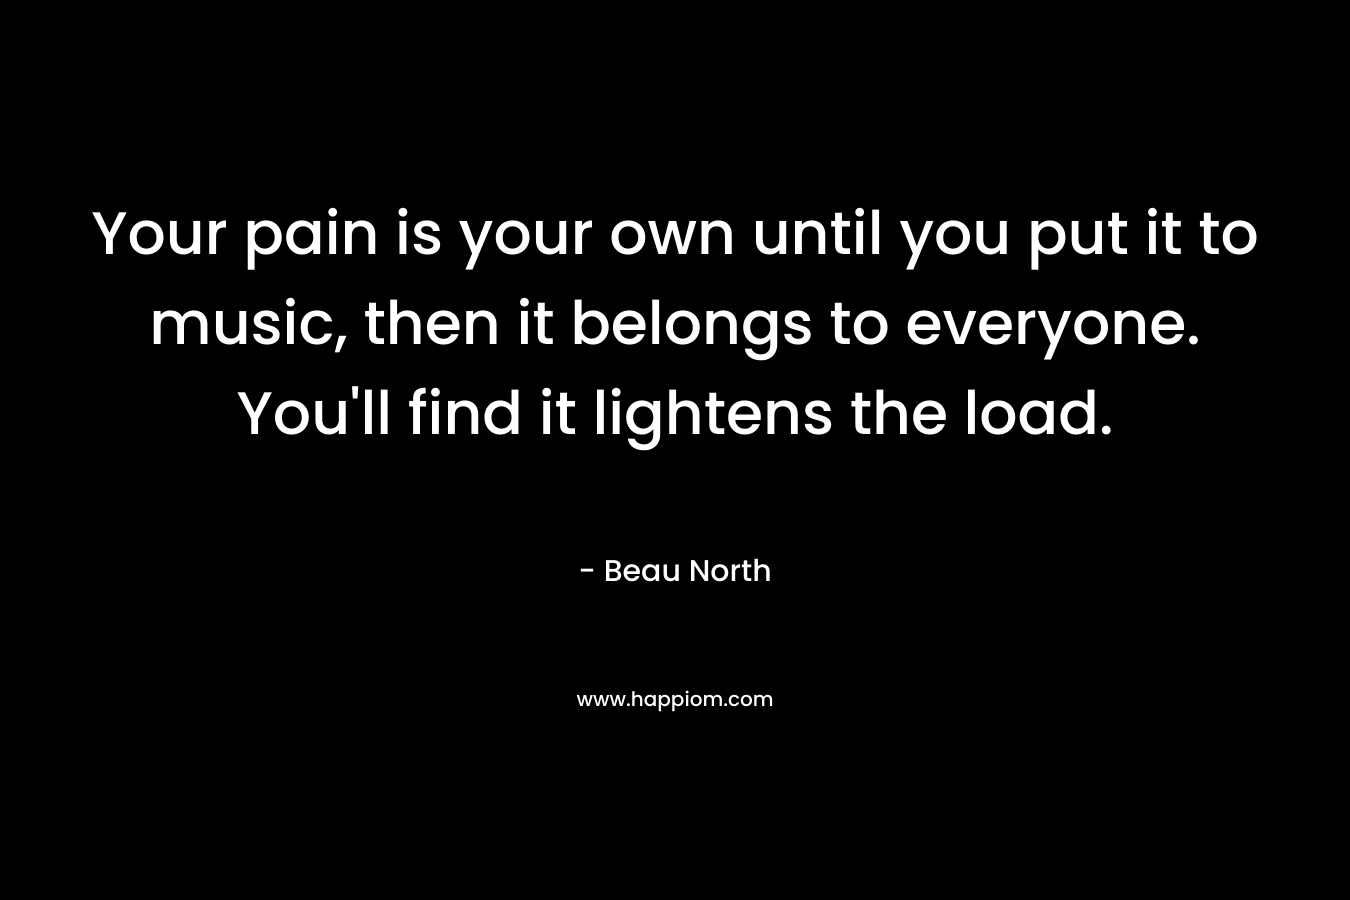 Your pain is your own until you put it to music, then it belongs to everyone. You’ll find it lightens the load. – Beau North